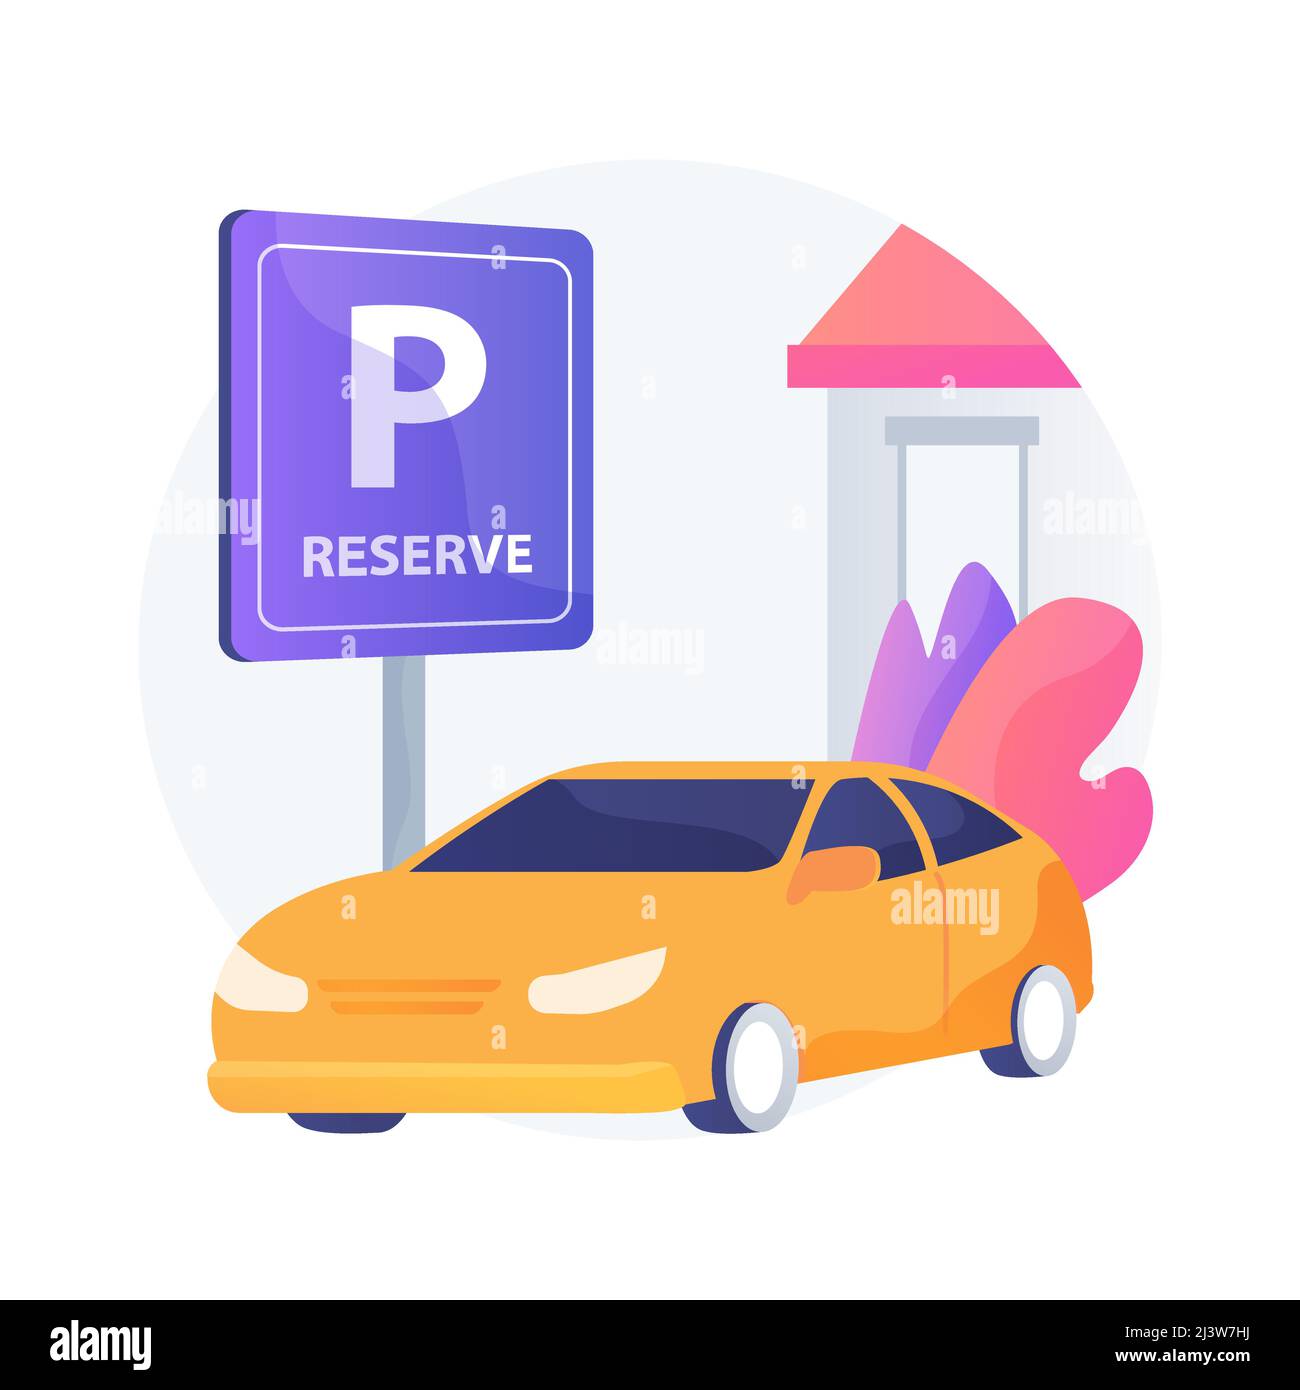 Parking space Cut Out Stock Images & Pictures - Page 2 - Alamy